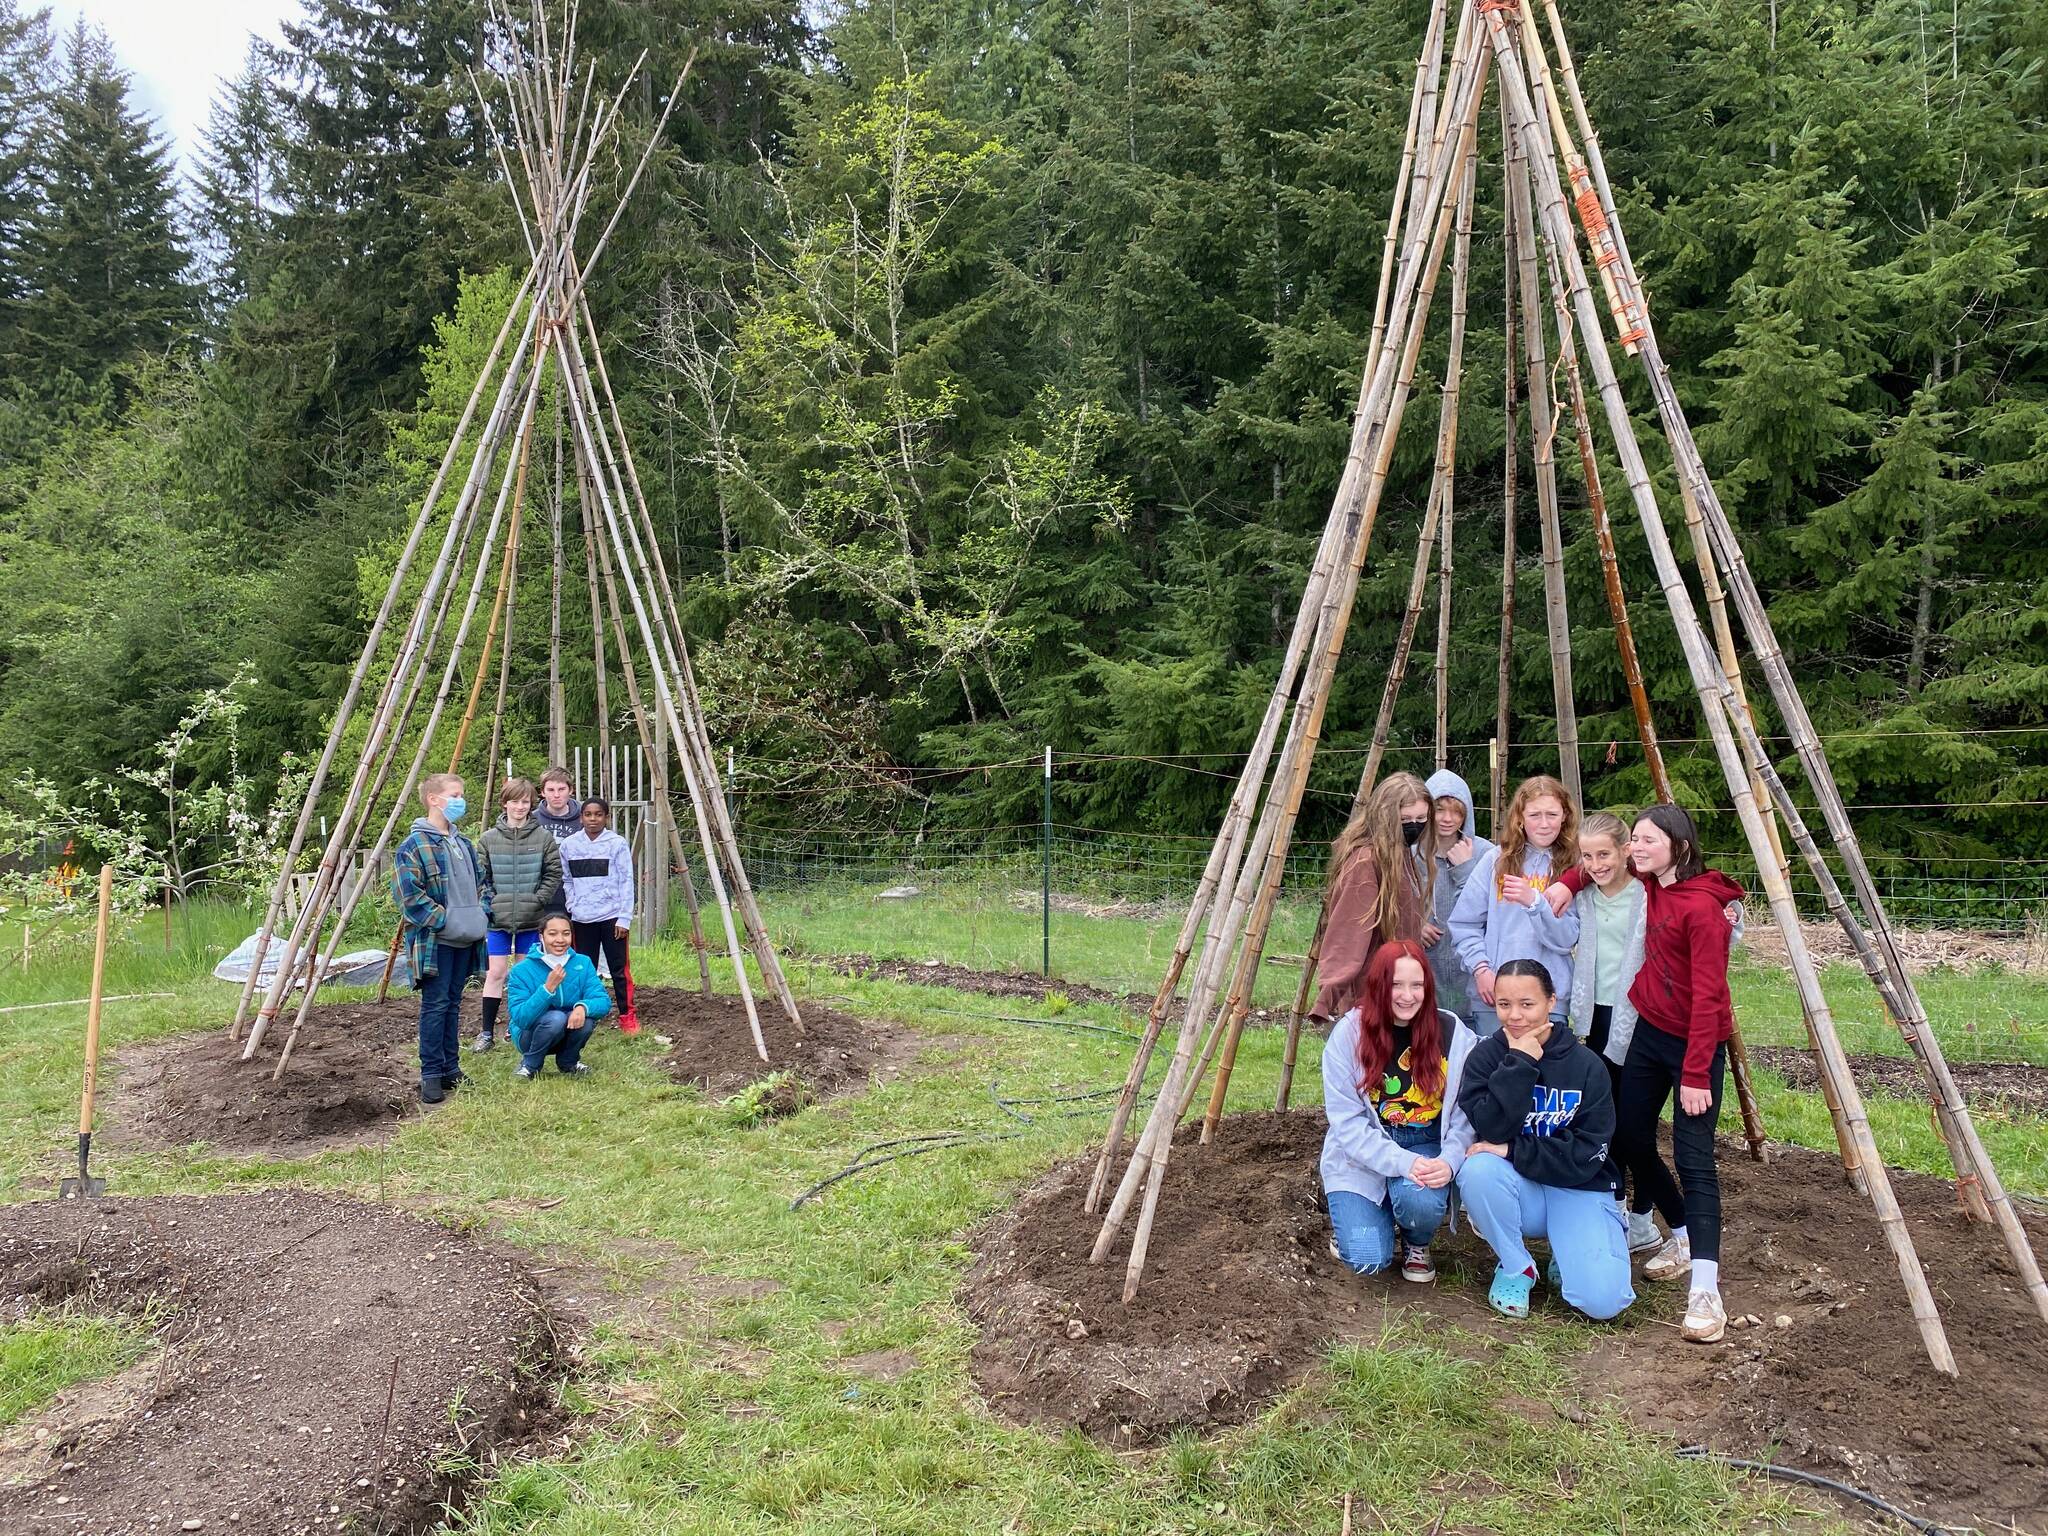 Photo by Cary Peterson
Sixth graders proudly pose under the teepee-like structures they helped build for scarlet runner beans to grow on. The school farm program of the South Whidbey School District has had a busy spring.